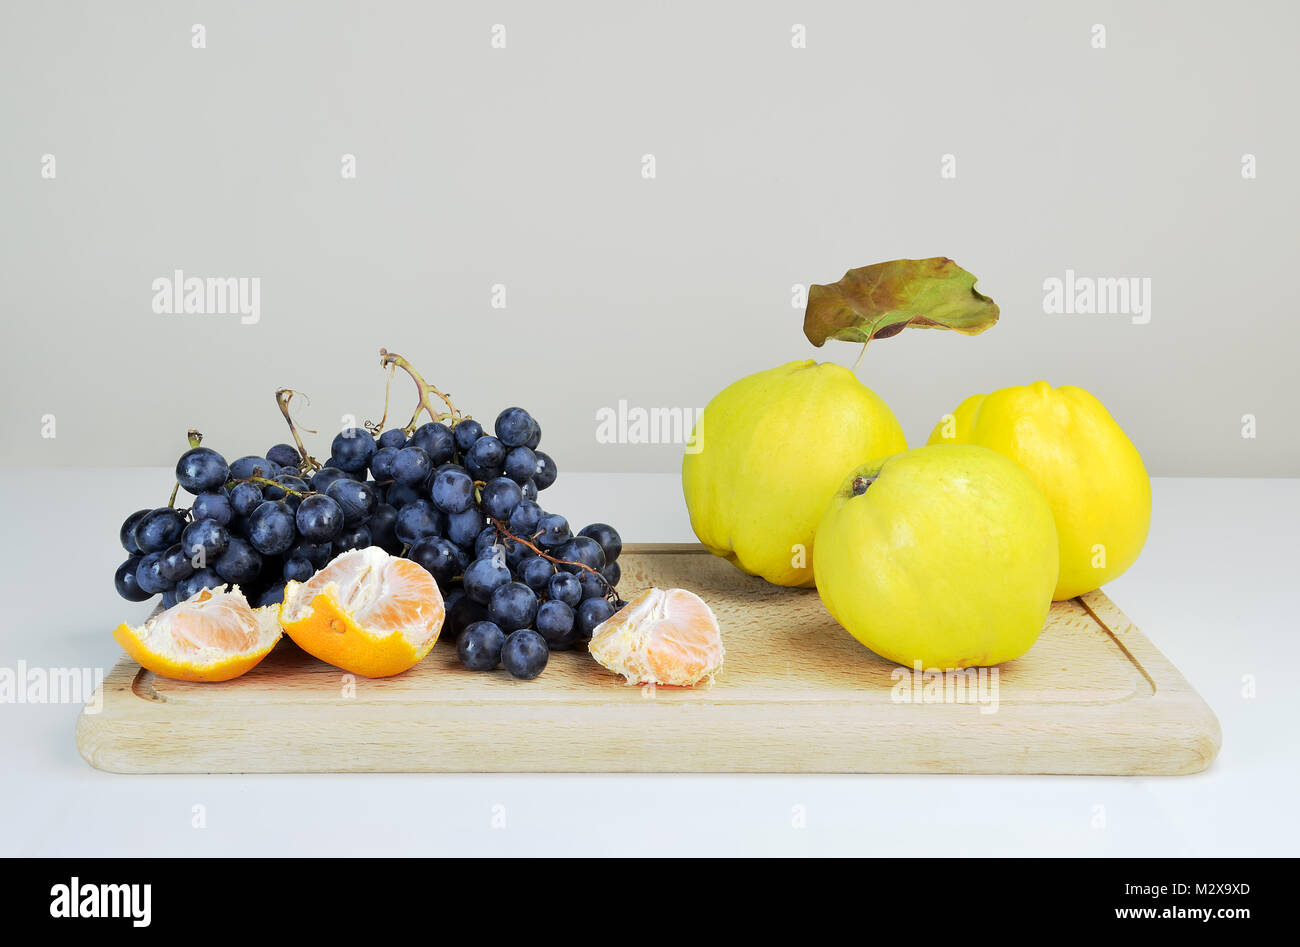 Concept with  quinces, grapes and mandarins Stock Photo